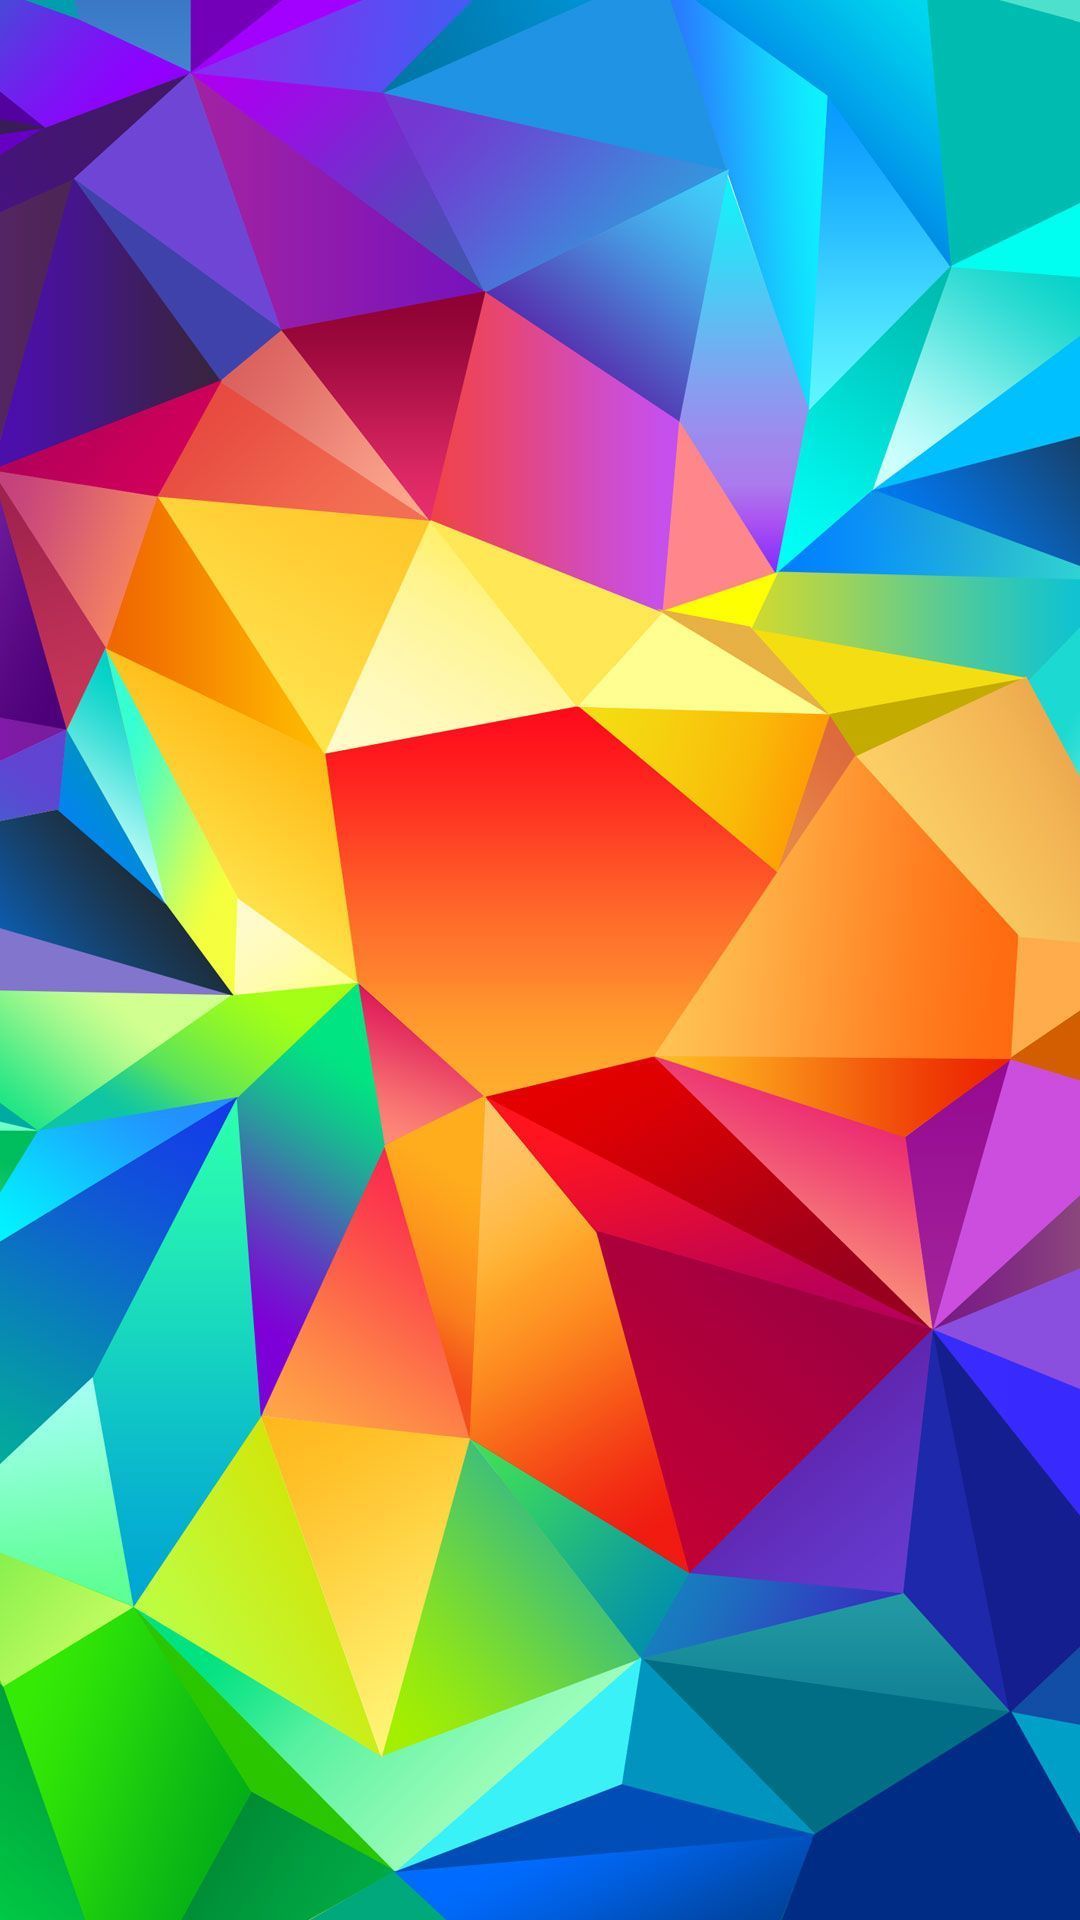 Colorful Polygon HD Wallpaper (Desktop Background / Android / iPhone) (1080p, 4k) (1080x1920) (2020)